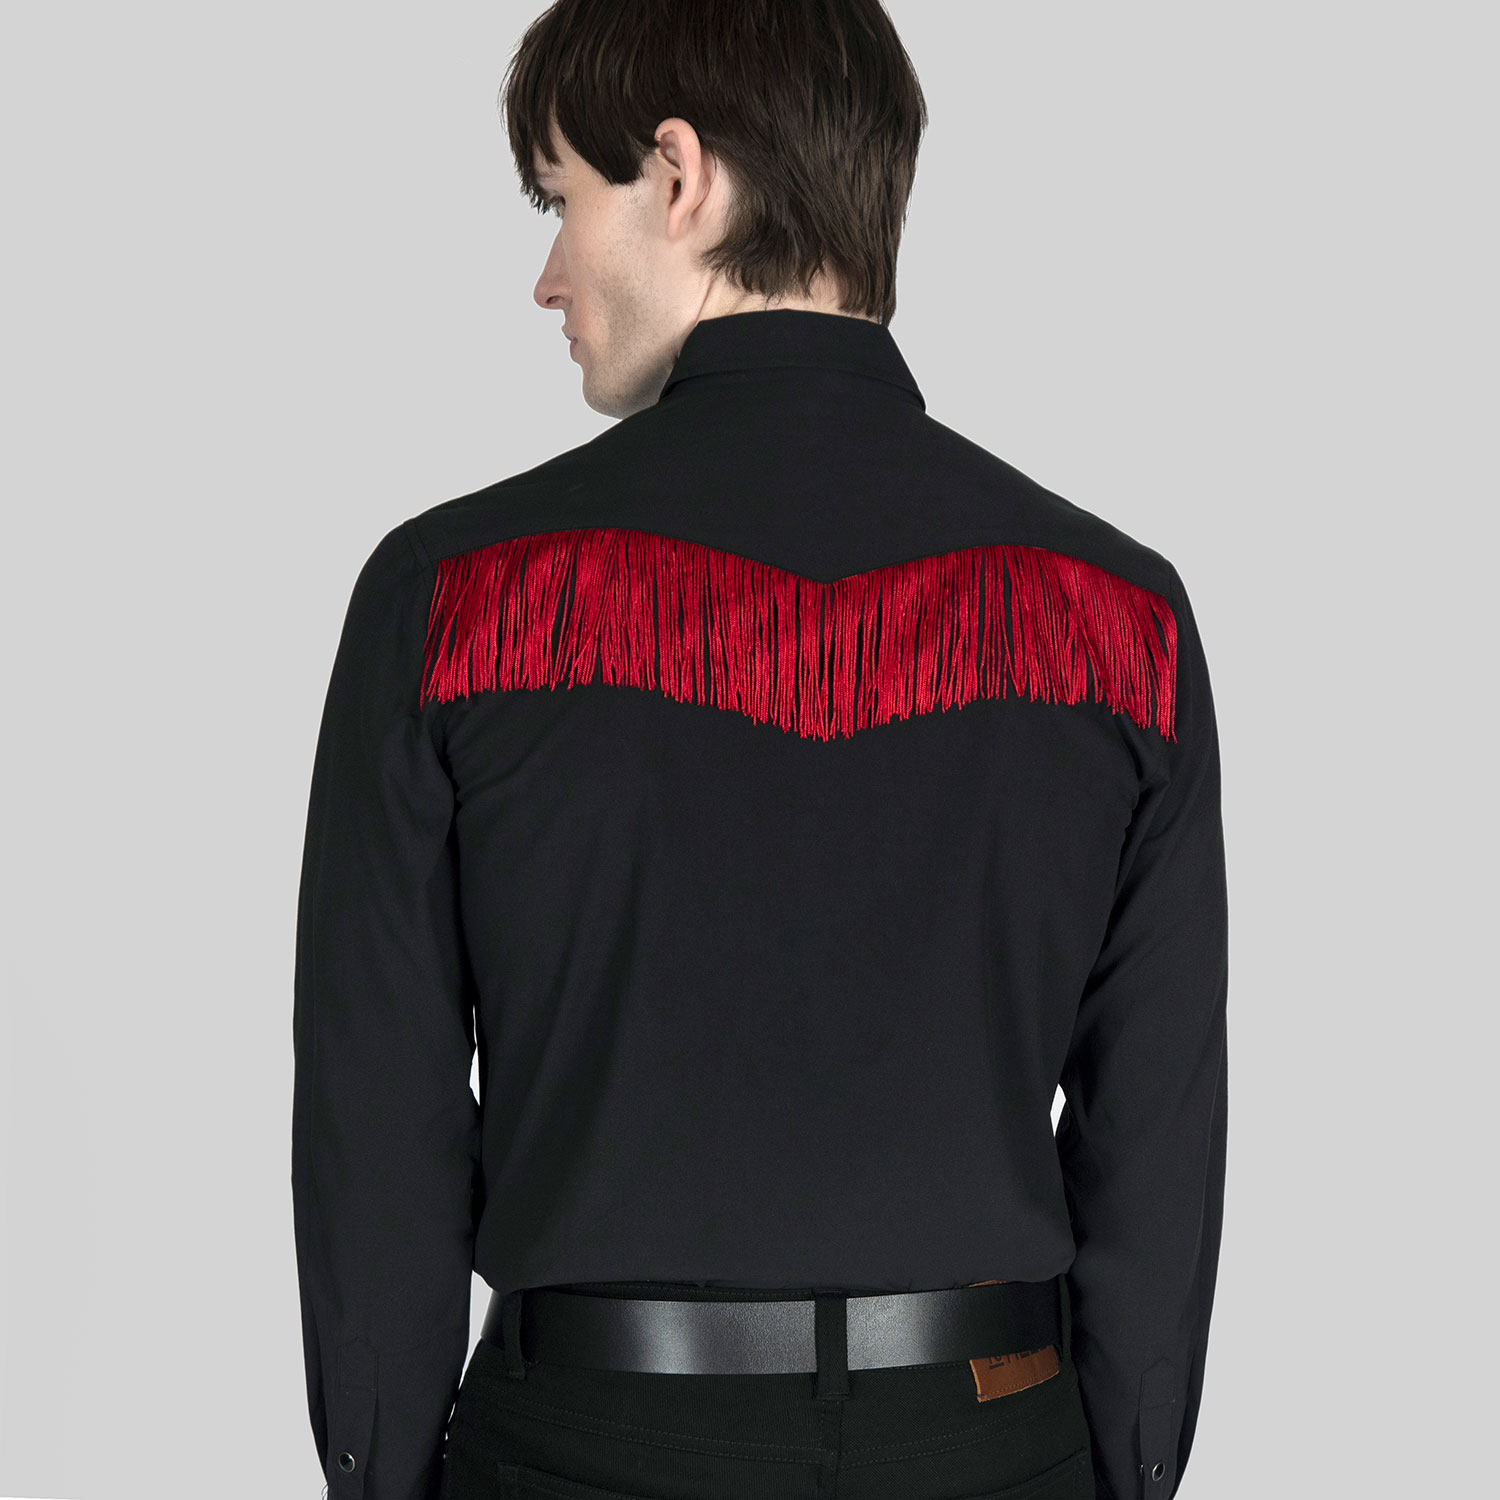 Around Town - Black and Red Fringe Western Shirt (Size XS, S, M, L, XL, 2XL, 3XL, 4XL) - Men's by Straight to Hell